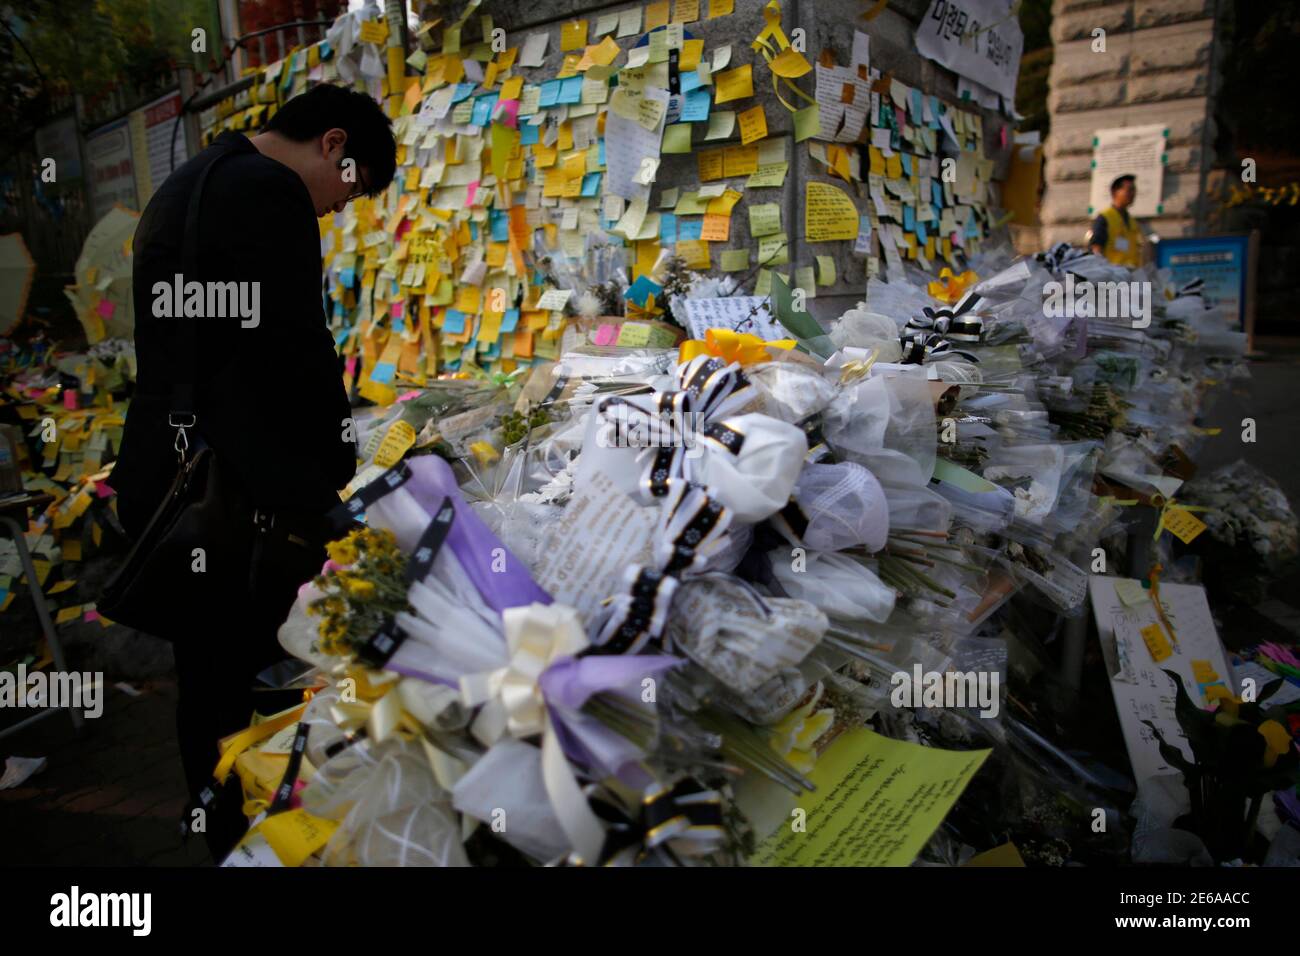 A man pays tribute as he reads messages for victims of the capsized passenger ship Sewol at the main gate of Danwon high school in Ansan April 25, 2014. The Sewol ferry, weighing almost 7,000 tons, sank on a routine trip from the port of Incheon, near Seoul, to the southern holiday island of Jeju. Investigations are focused on human error and mechanical failure. REUTERS/Issei Kato (SOUTH KOREA - Tags: DISASTER MARITIME TPX IMAGES OF THE DAY) Stock Photo